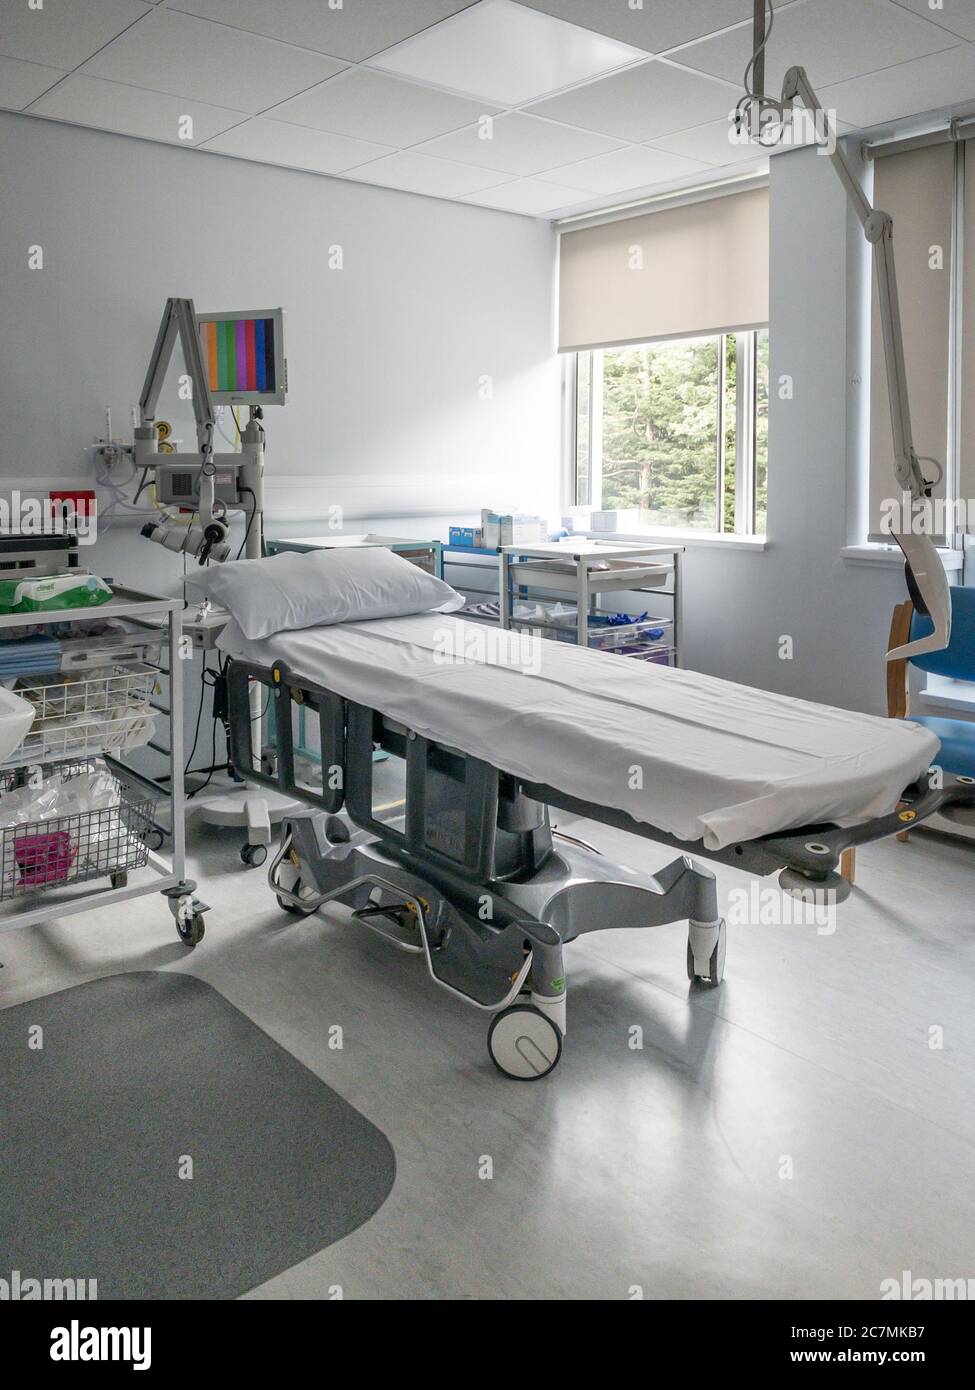 Stretcher in assessment and treatment room of hospital Stock Photo